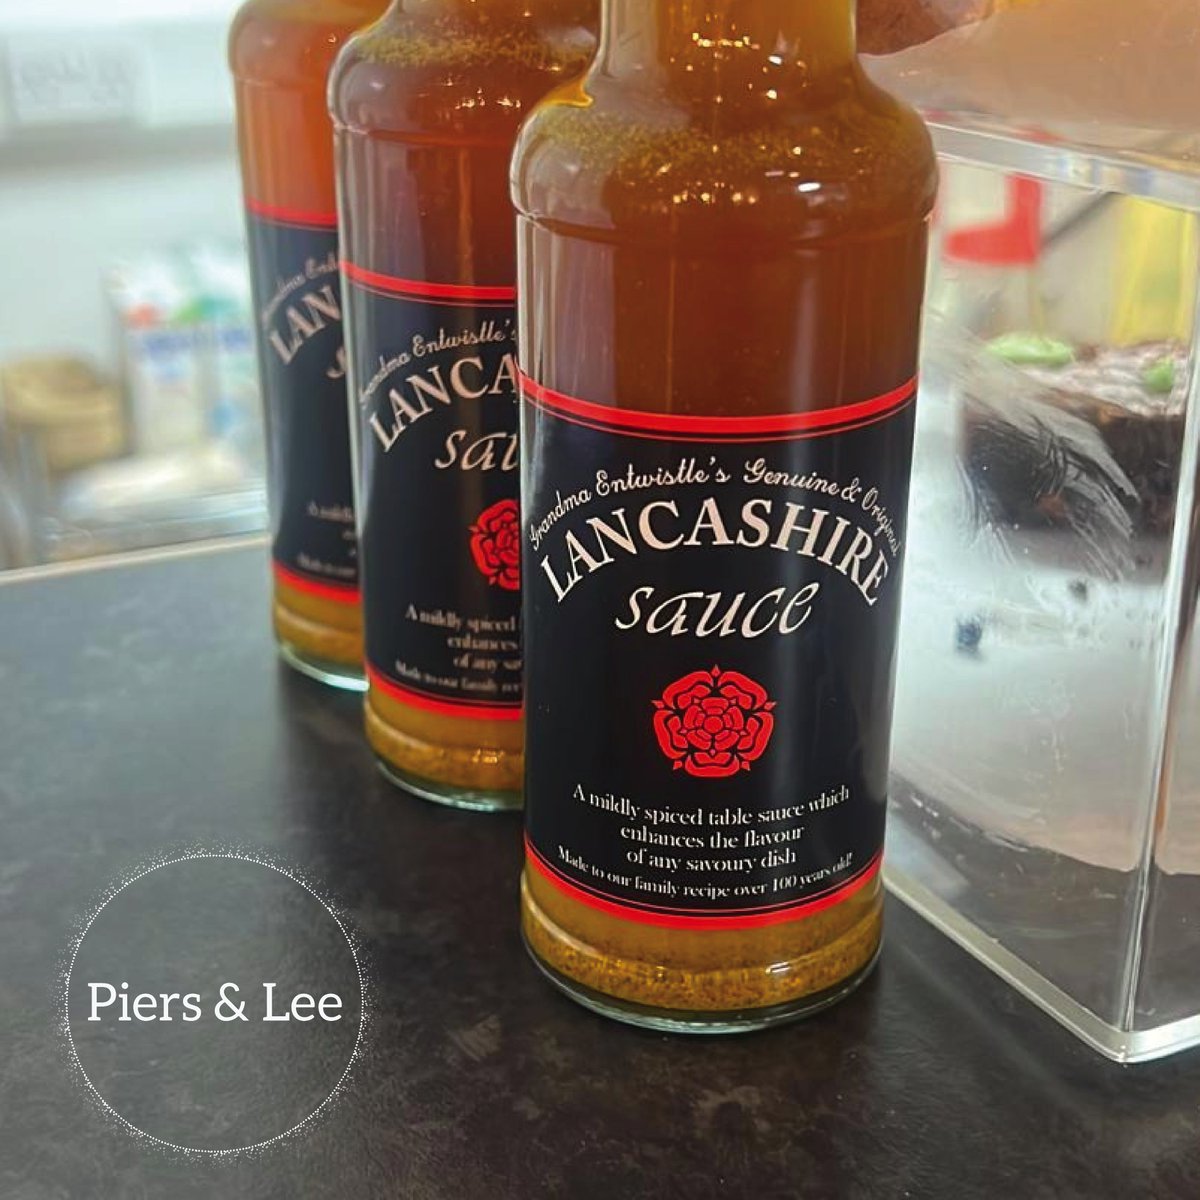 📢 Exciting Announcement! 🎉

We have great news to share with you all. Starting today, we're thrilled to announce that we now stock Lancashire Sauce for only £2.59!

#LancashireSauce #Lancashire #Sauce #Bury #PiersandLee